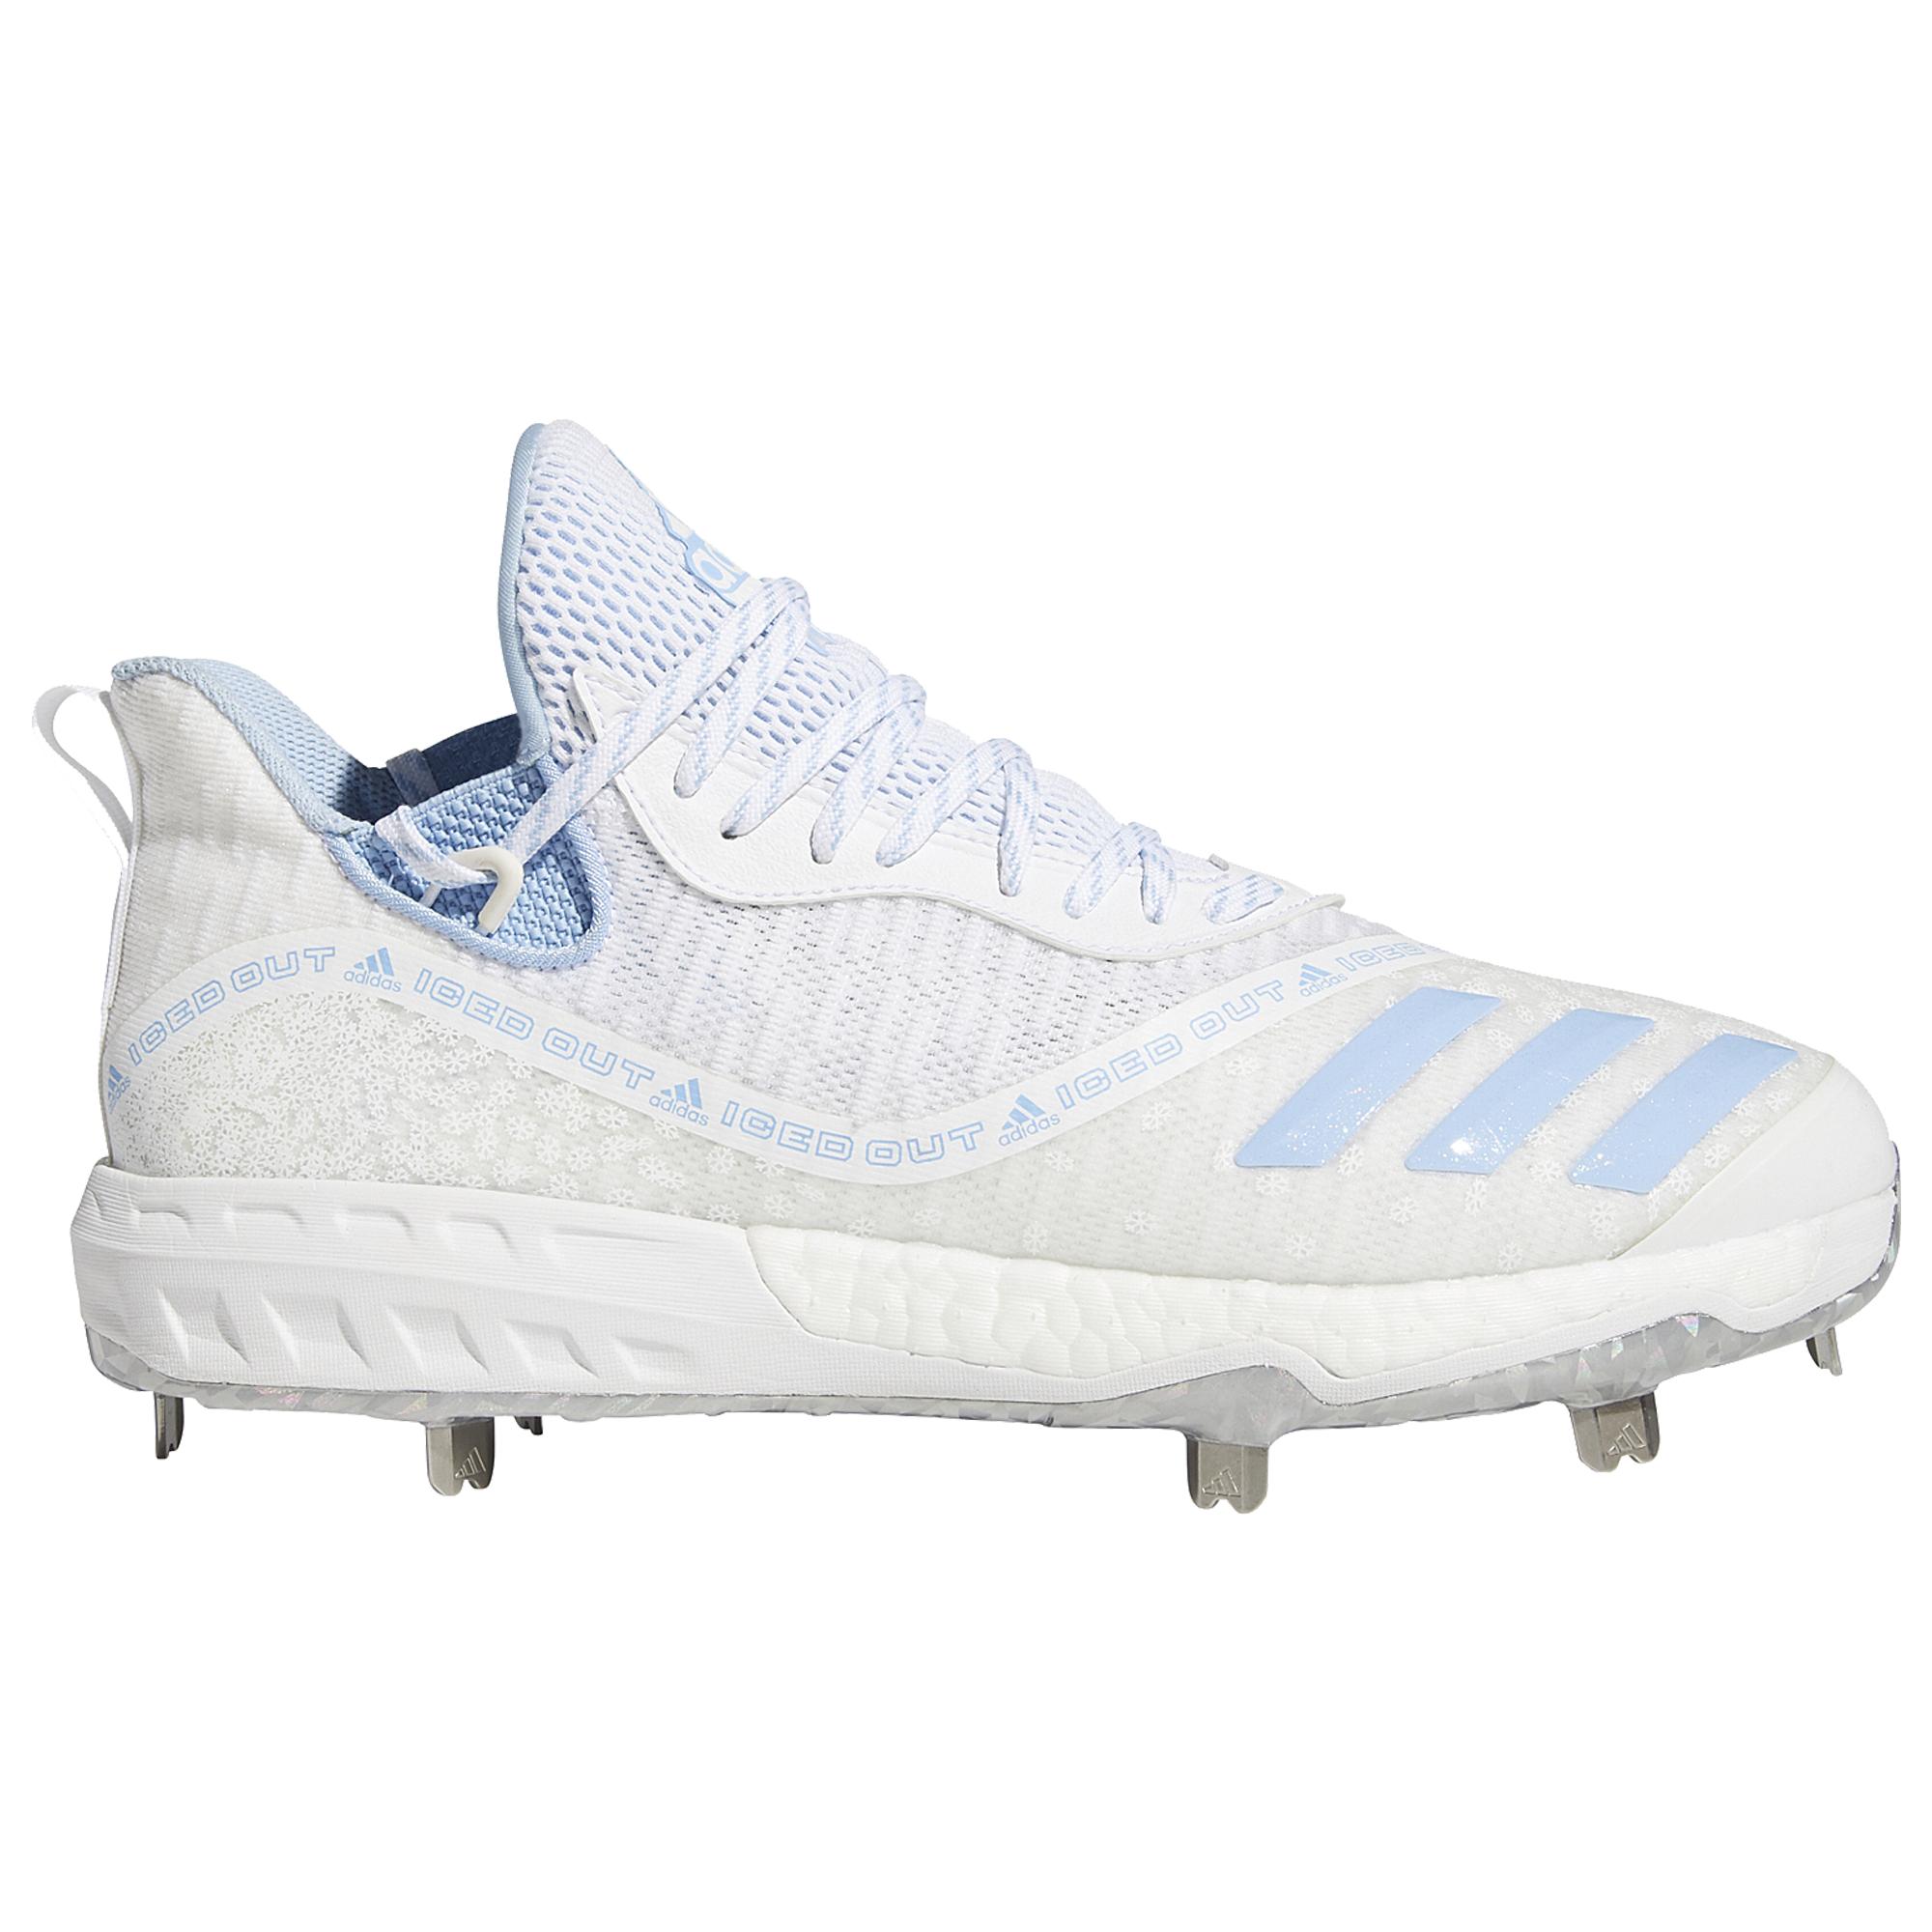 icon v cleats